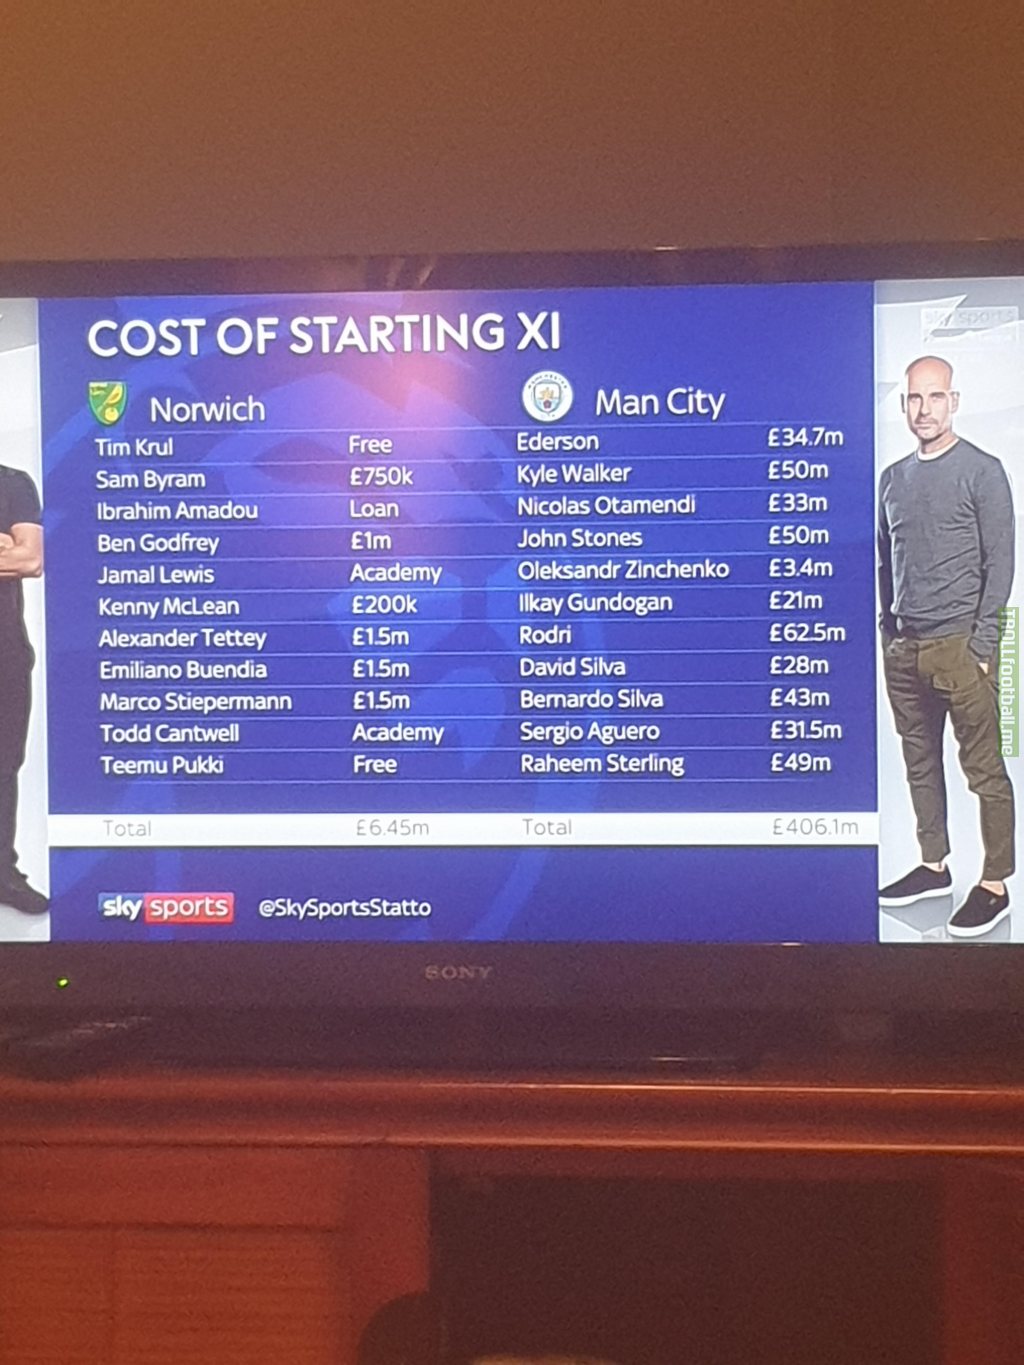 Difference between the cost of Norwich and Man Citys starting 11